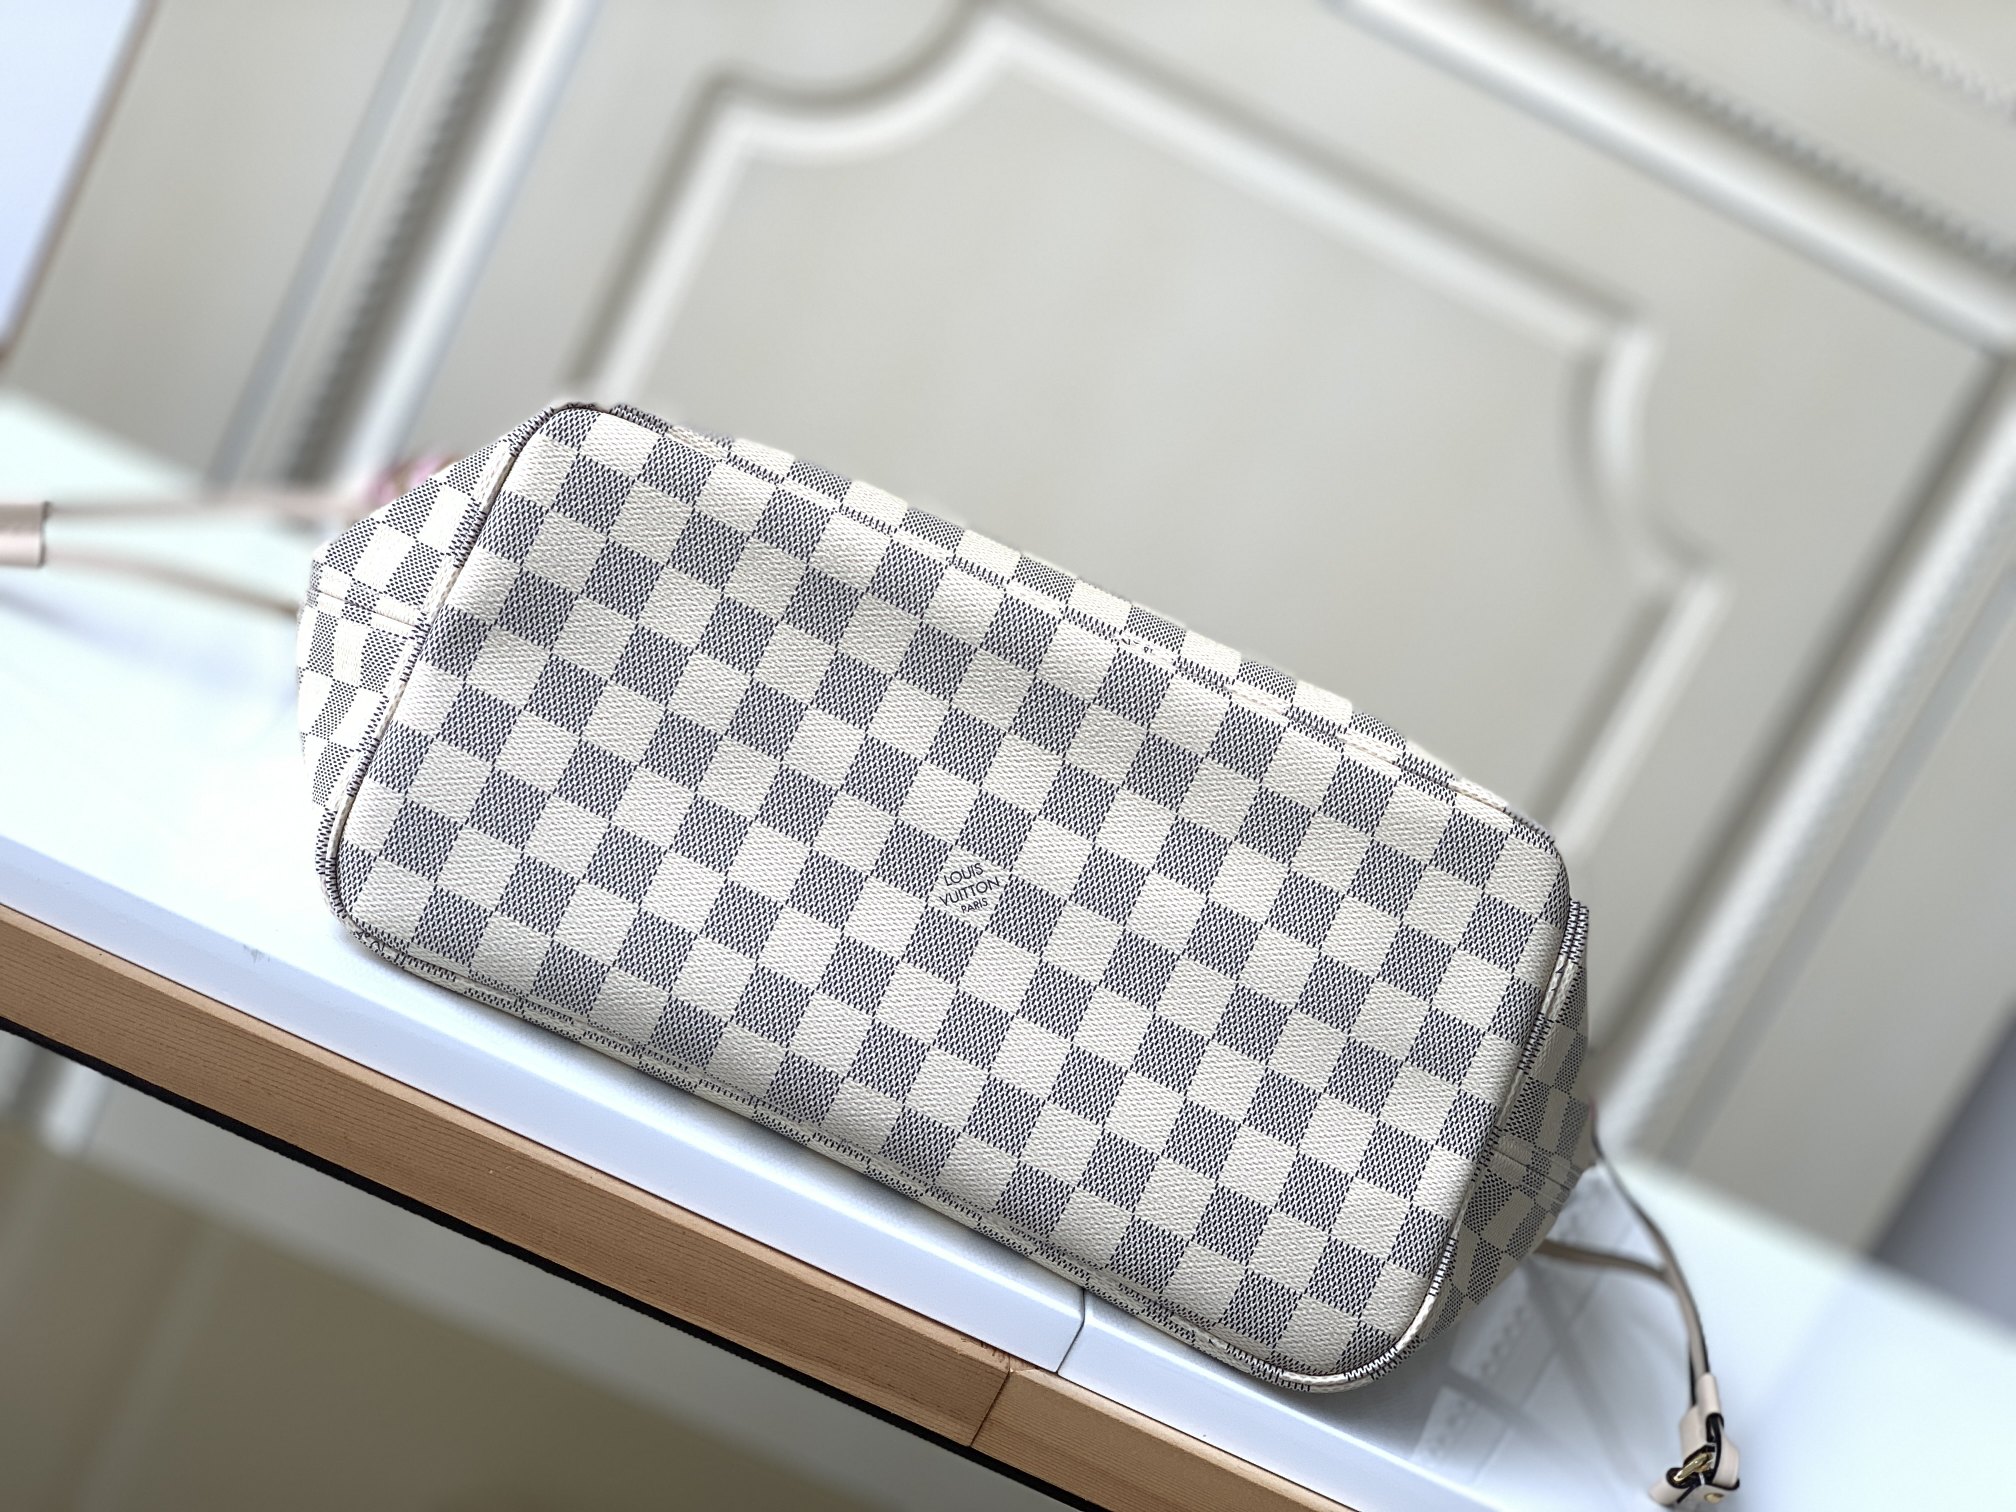 Copy Louis Vuitton N45295 Neverfull MM Tote Damier Azur Coated Canvas